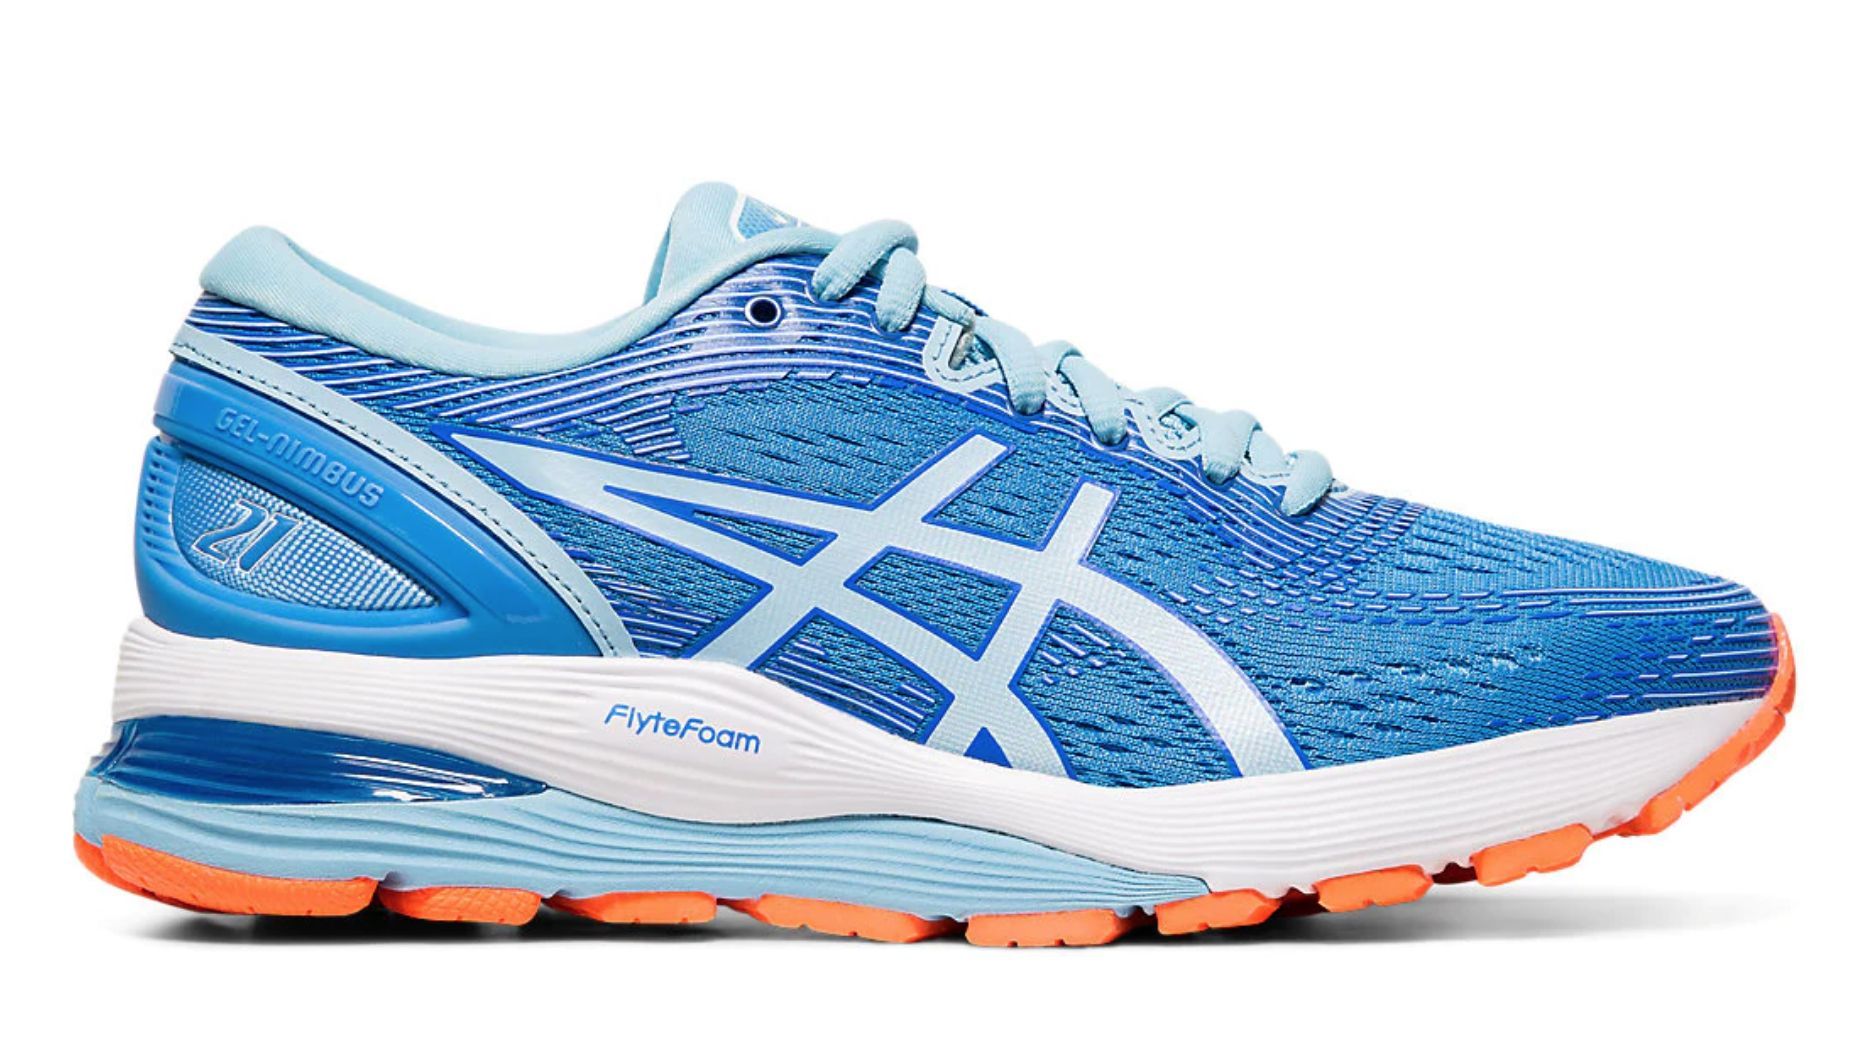 asics thin soled running shoes